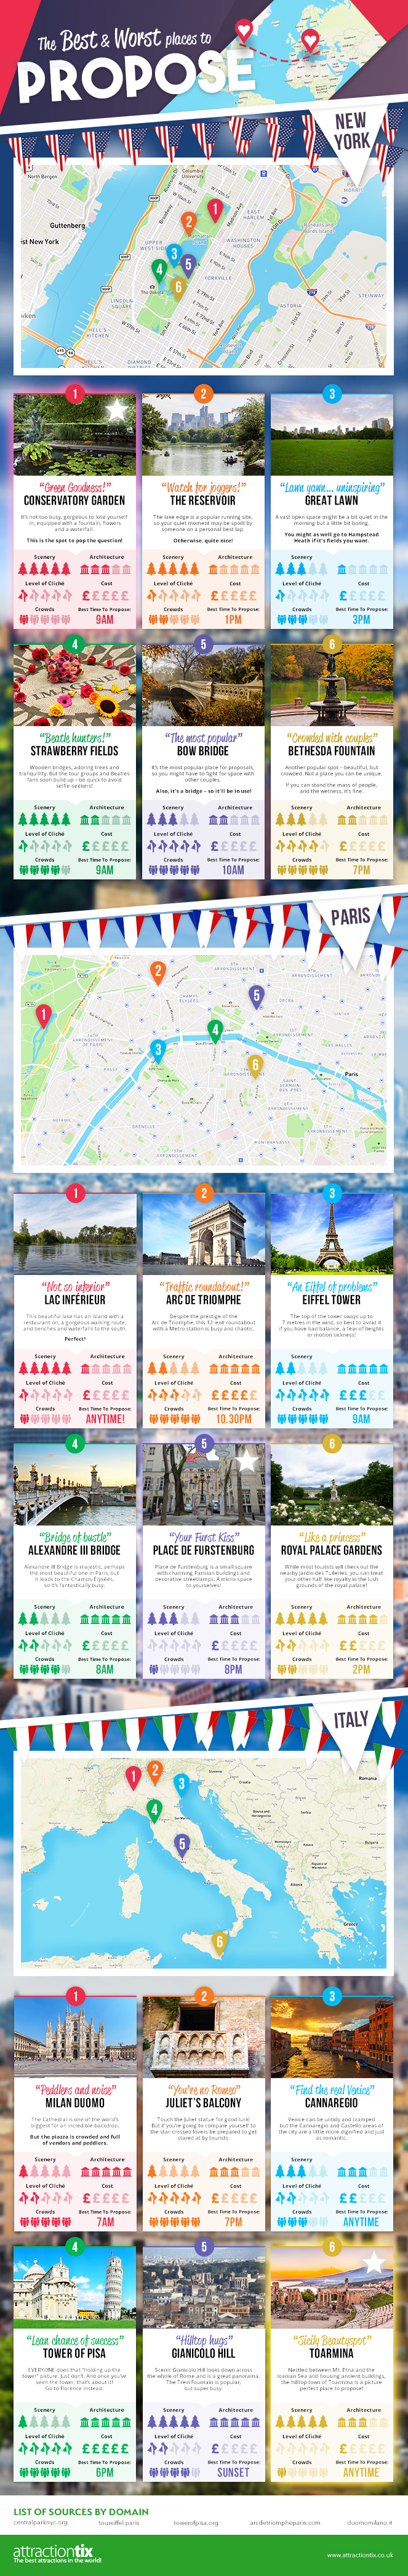 Best places to propose infographic- AttractionTix.co.uk